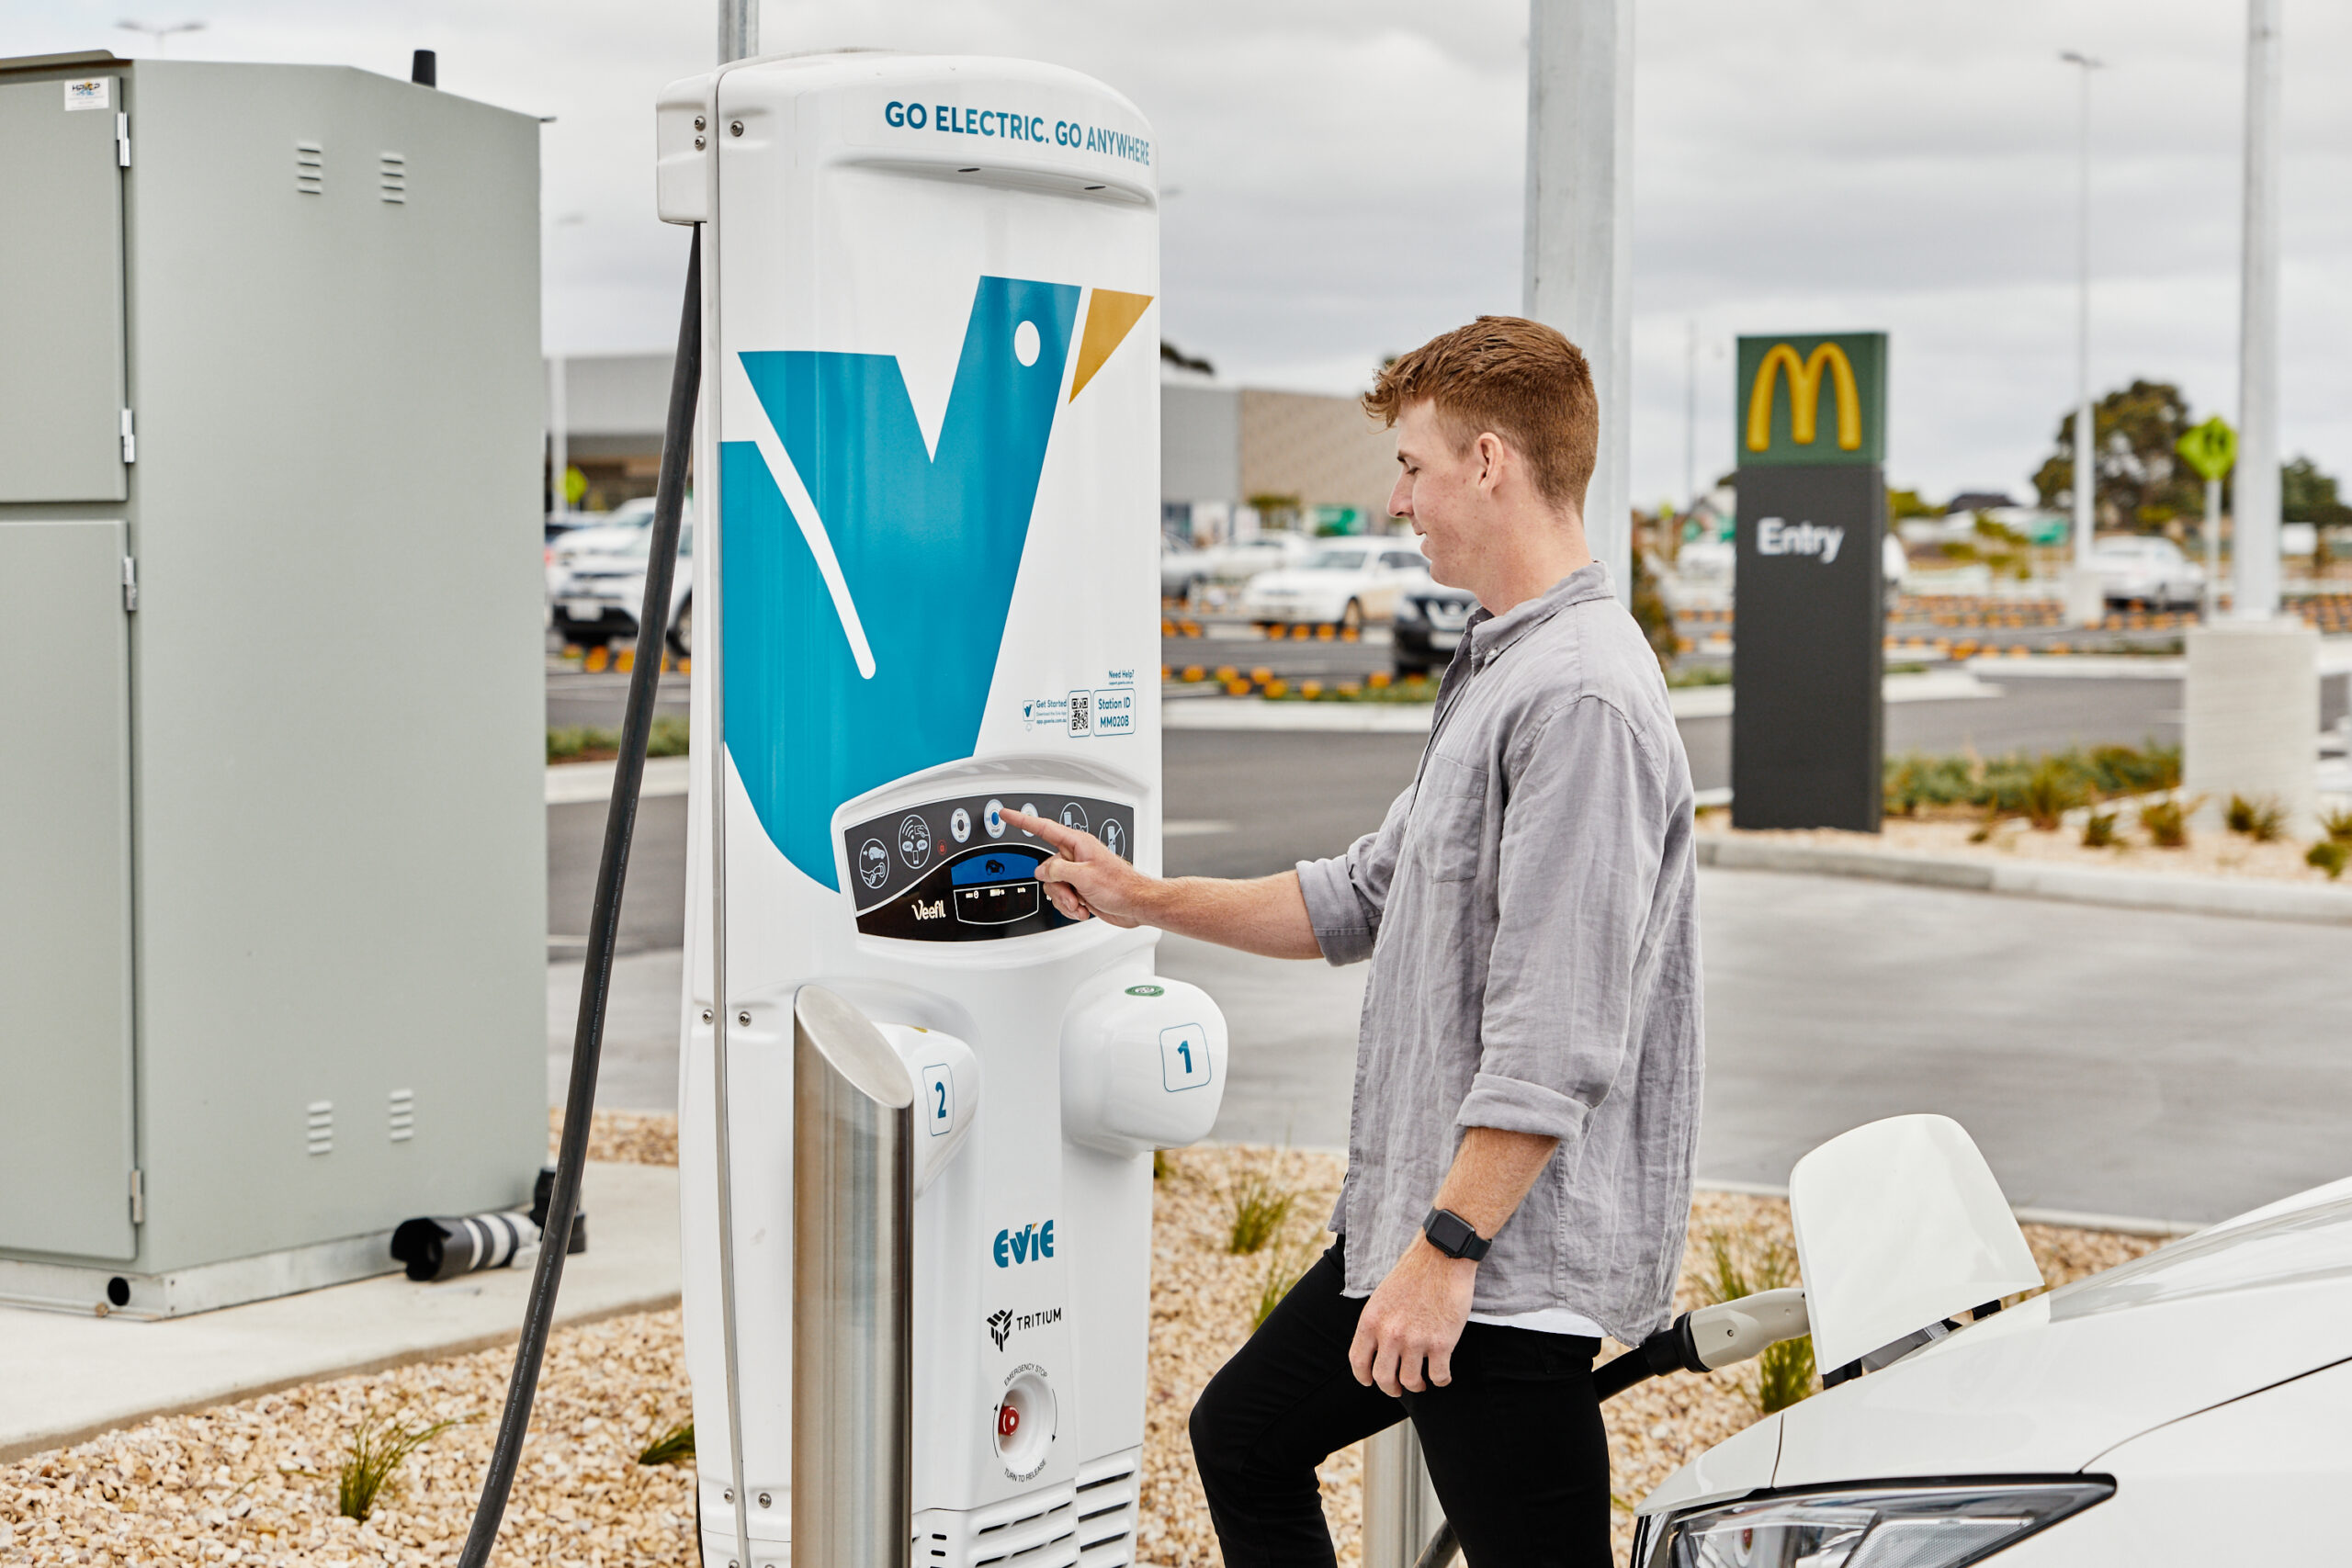 “Our electric fleet delivered 2,000 km per week per car without installing home or workplace chargers”